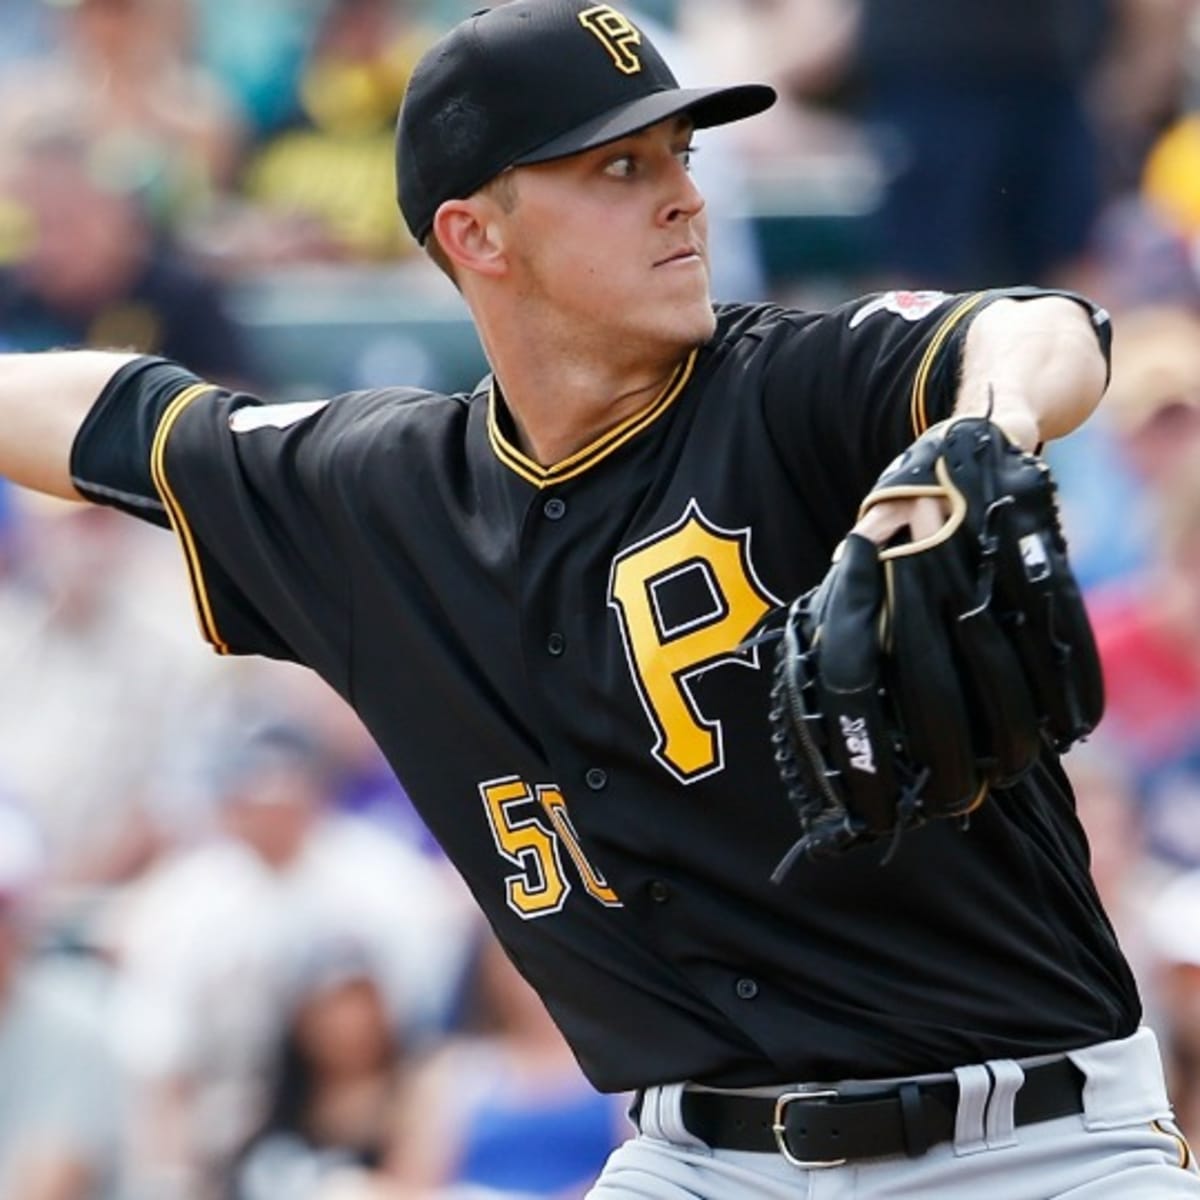 Jameson Taillon savors first taste of the big leagues